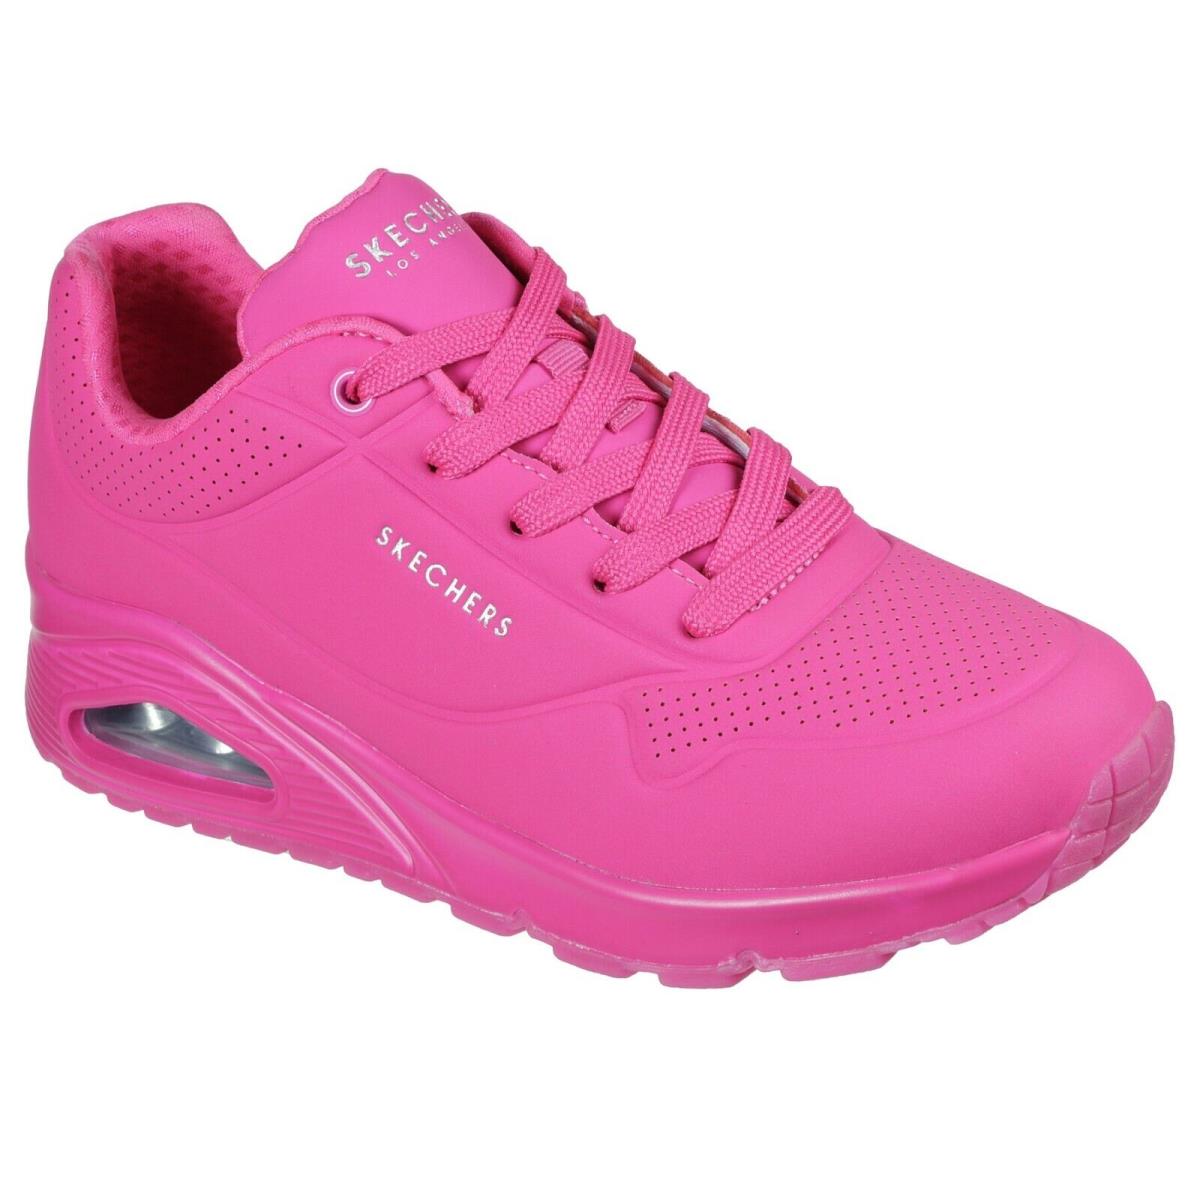 Skechers shoes Uno Night Shades - Hot Pink 5